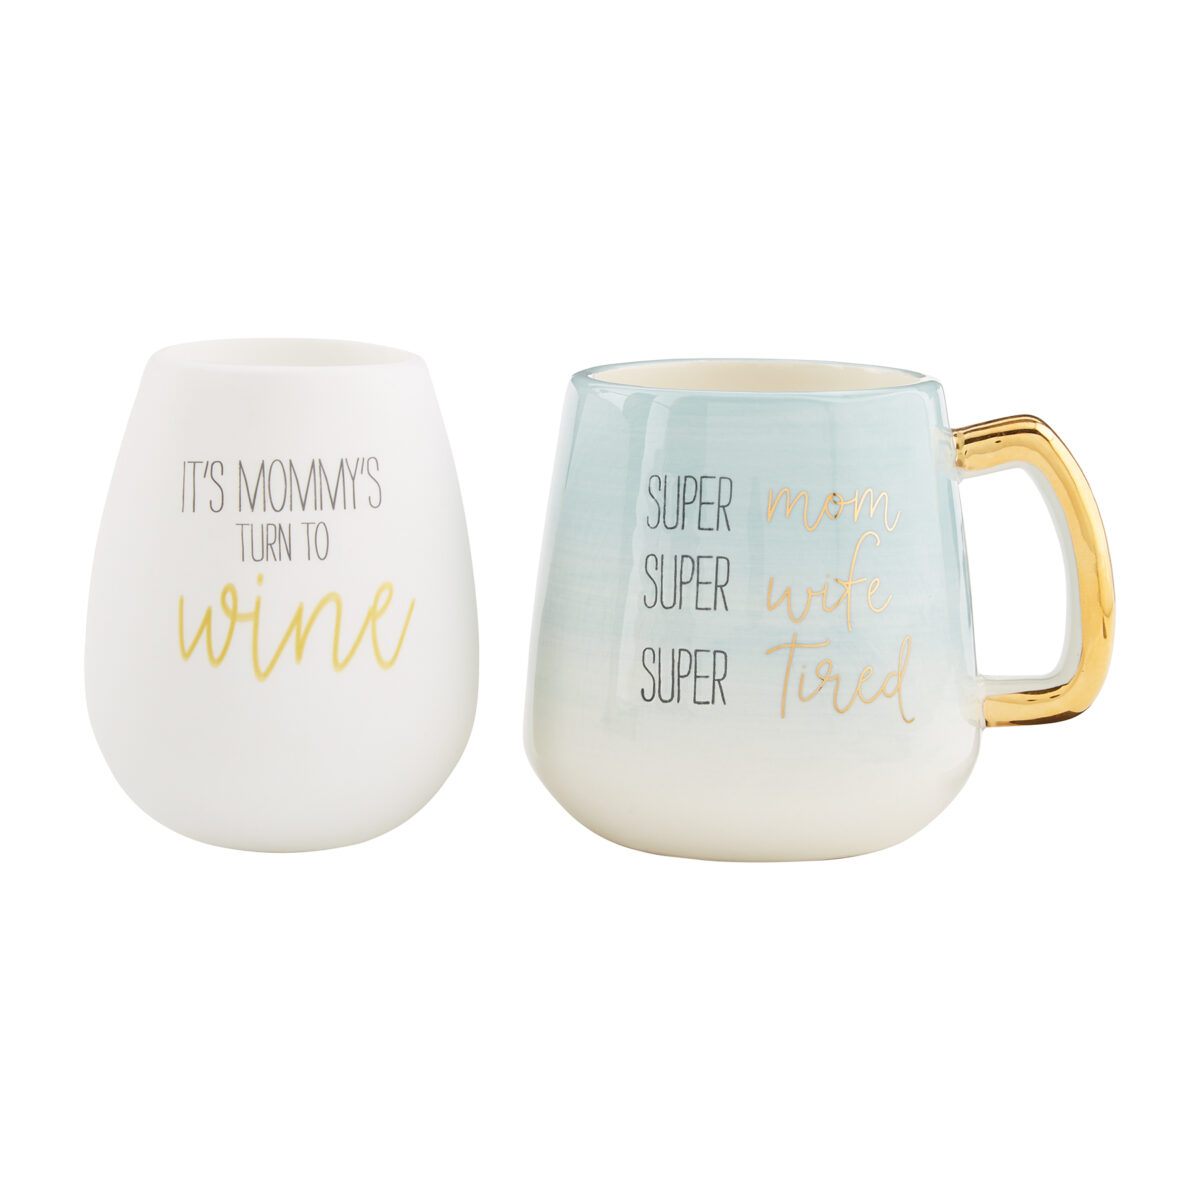 25 Of The Best Gifts For The Mom Who Has Everything